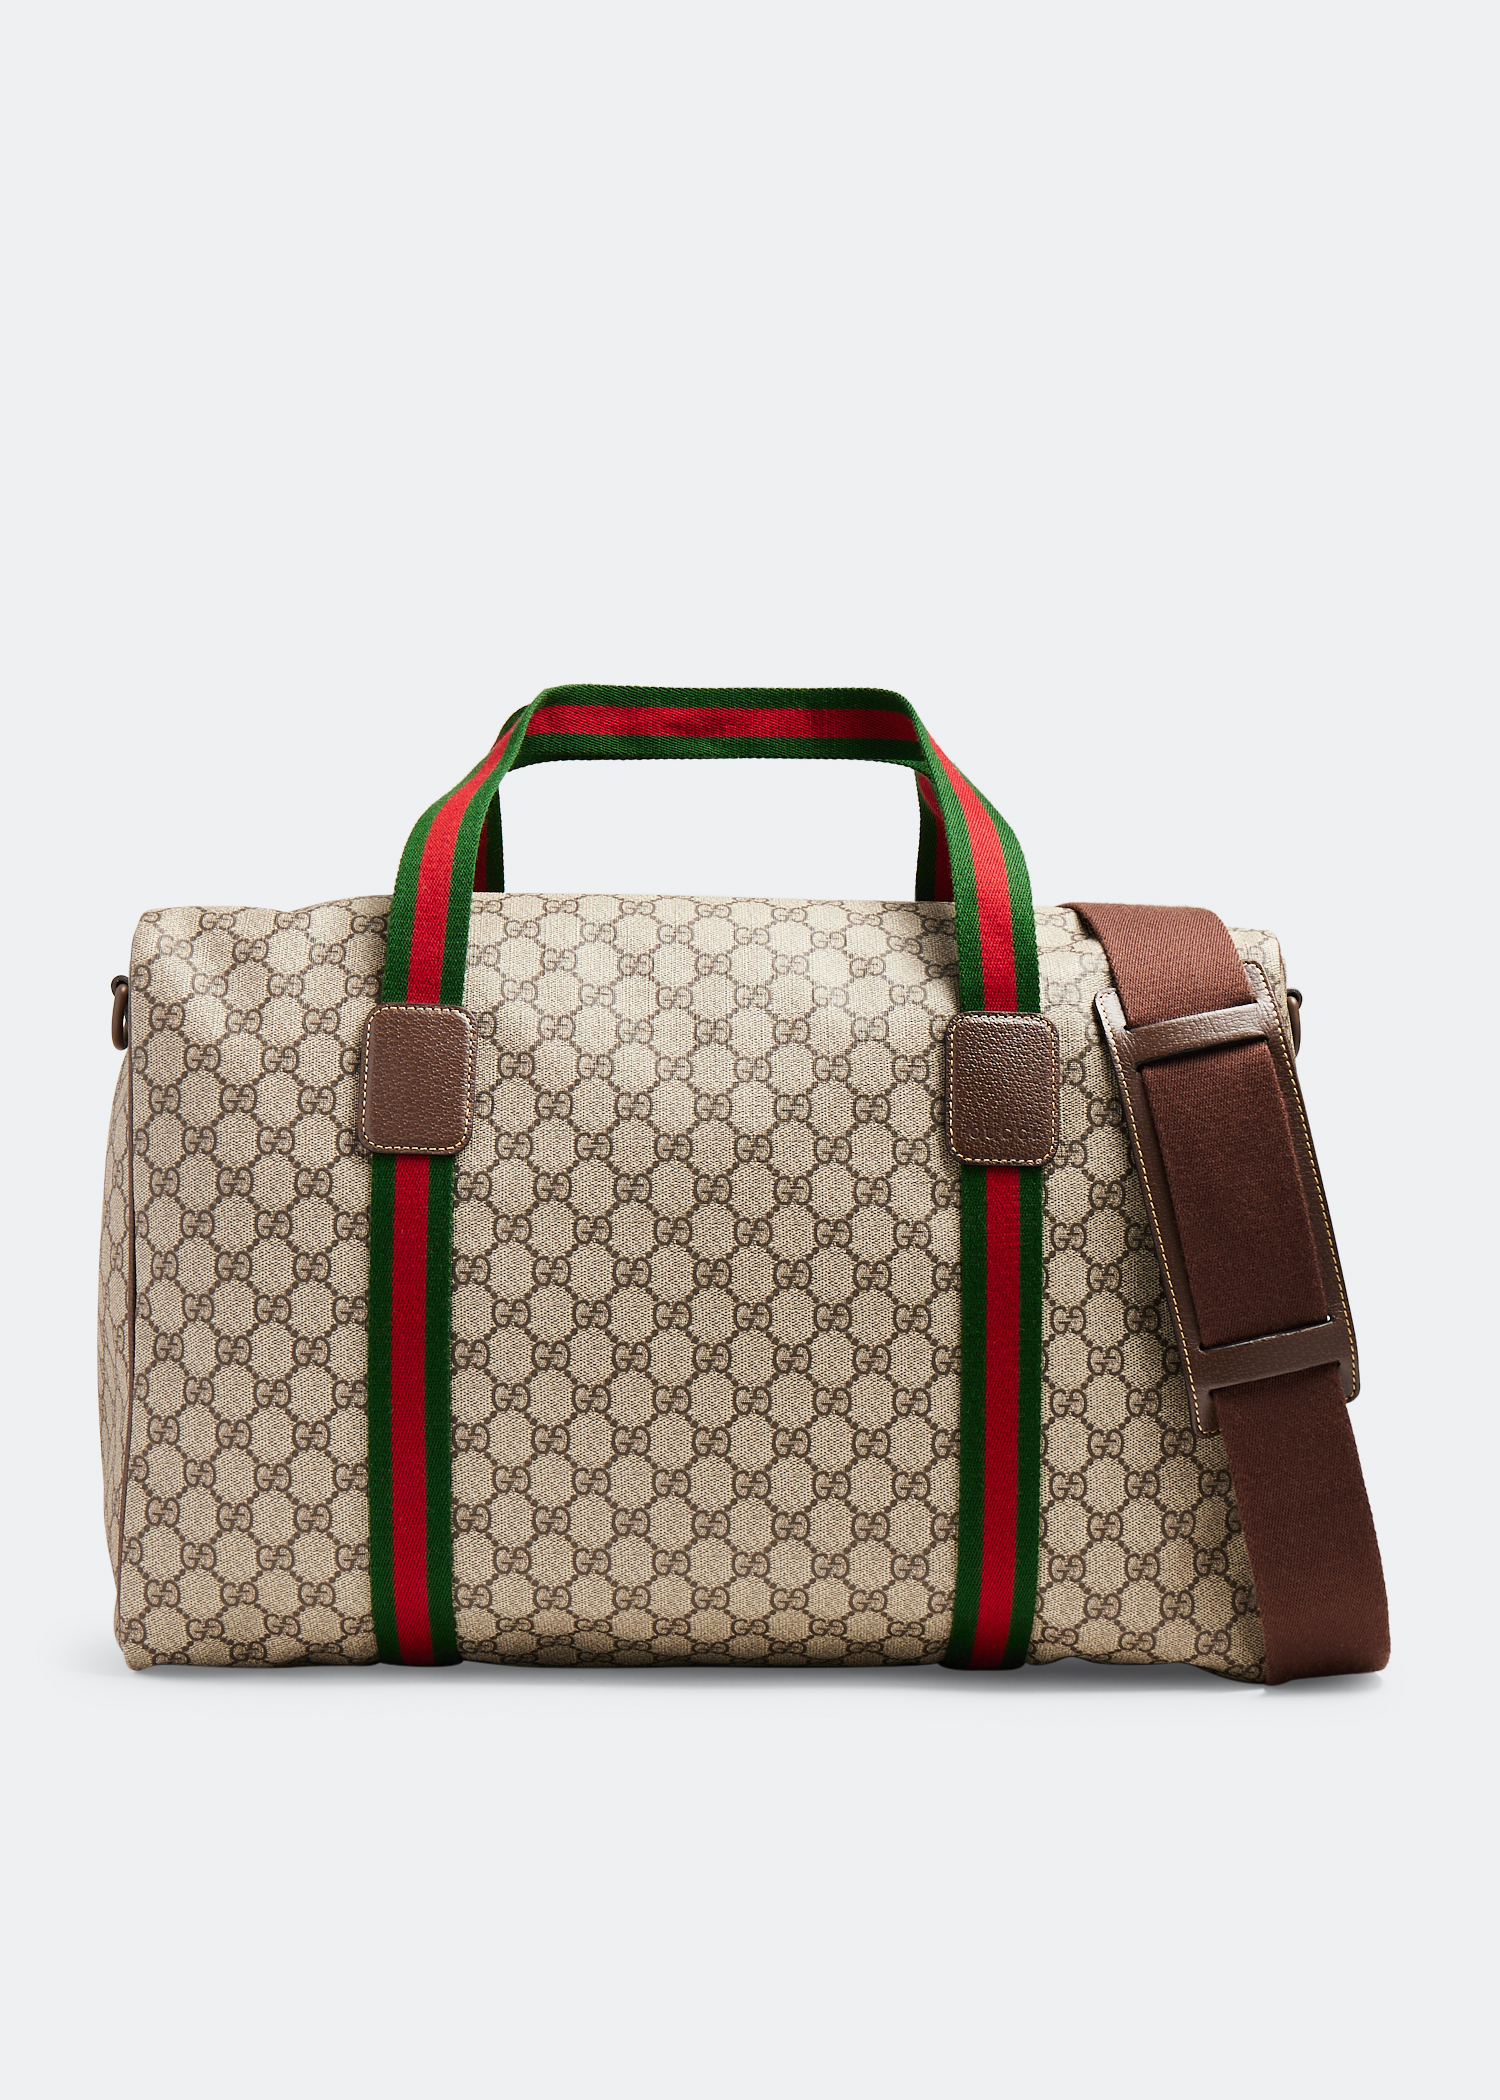 Gucci GG Supreme Large Canvas Duffle Bag in Brown